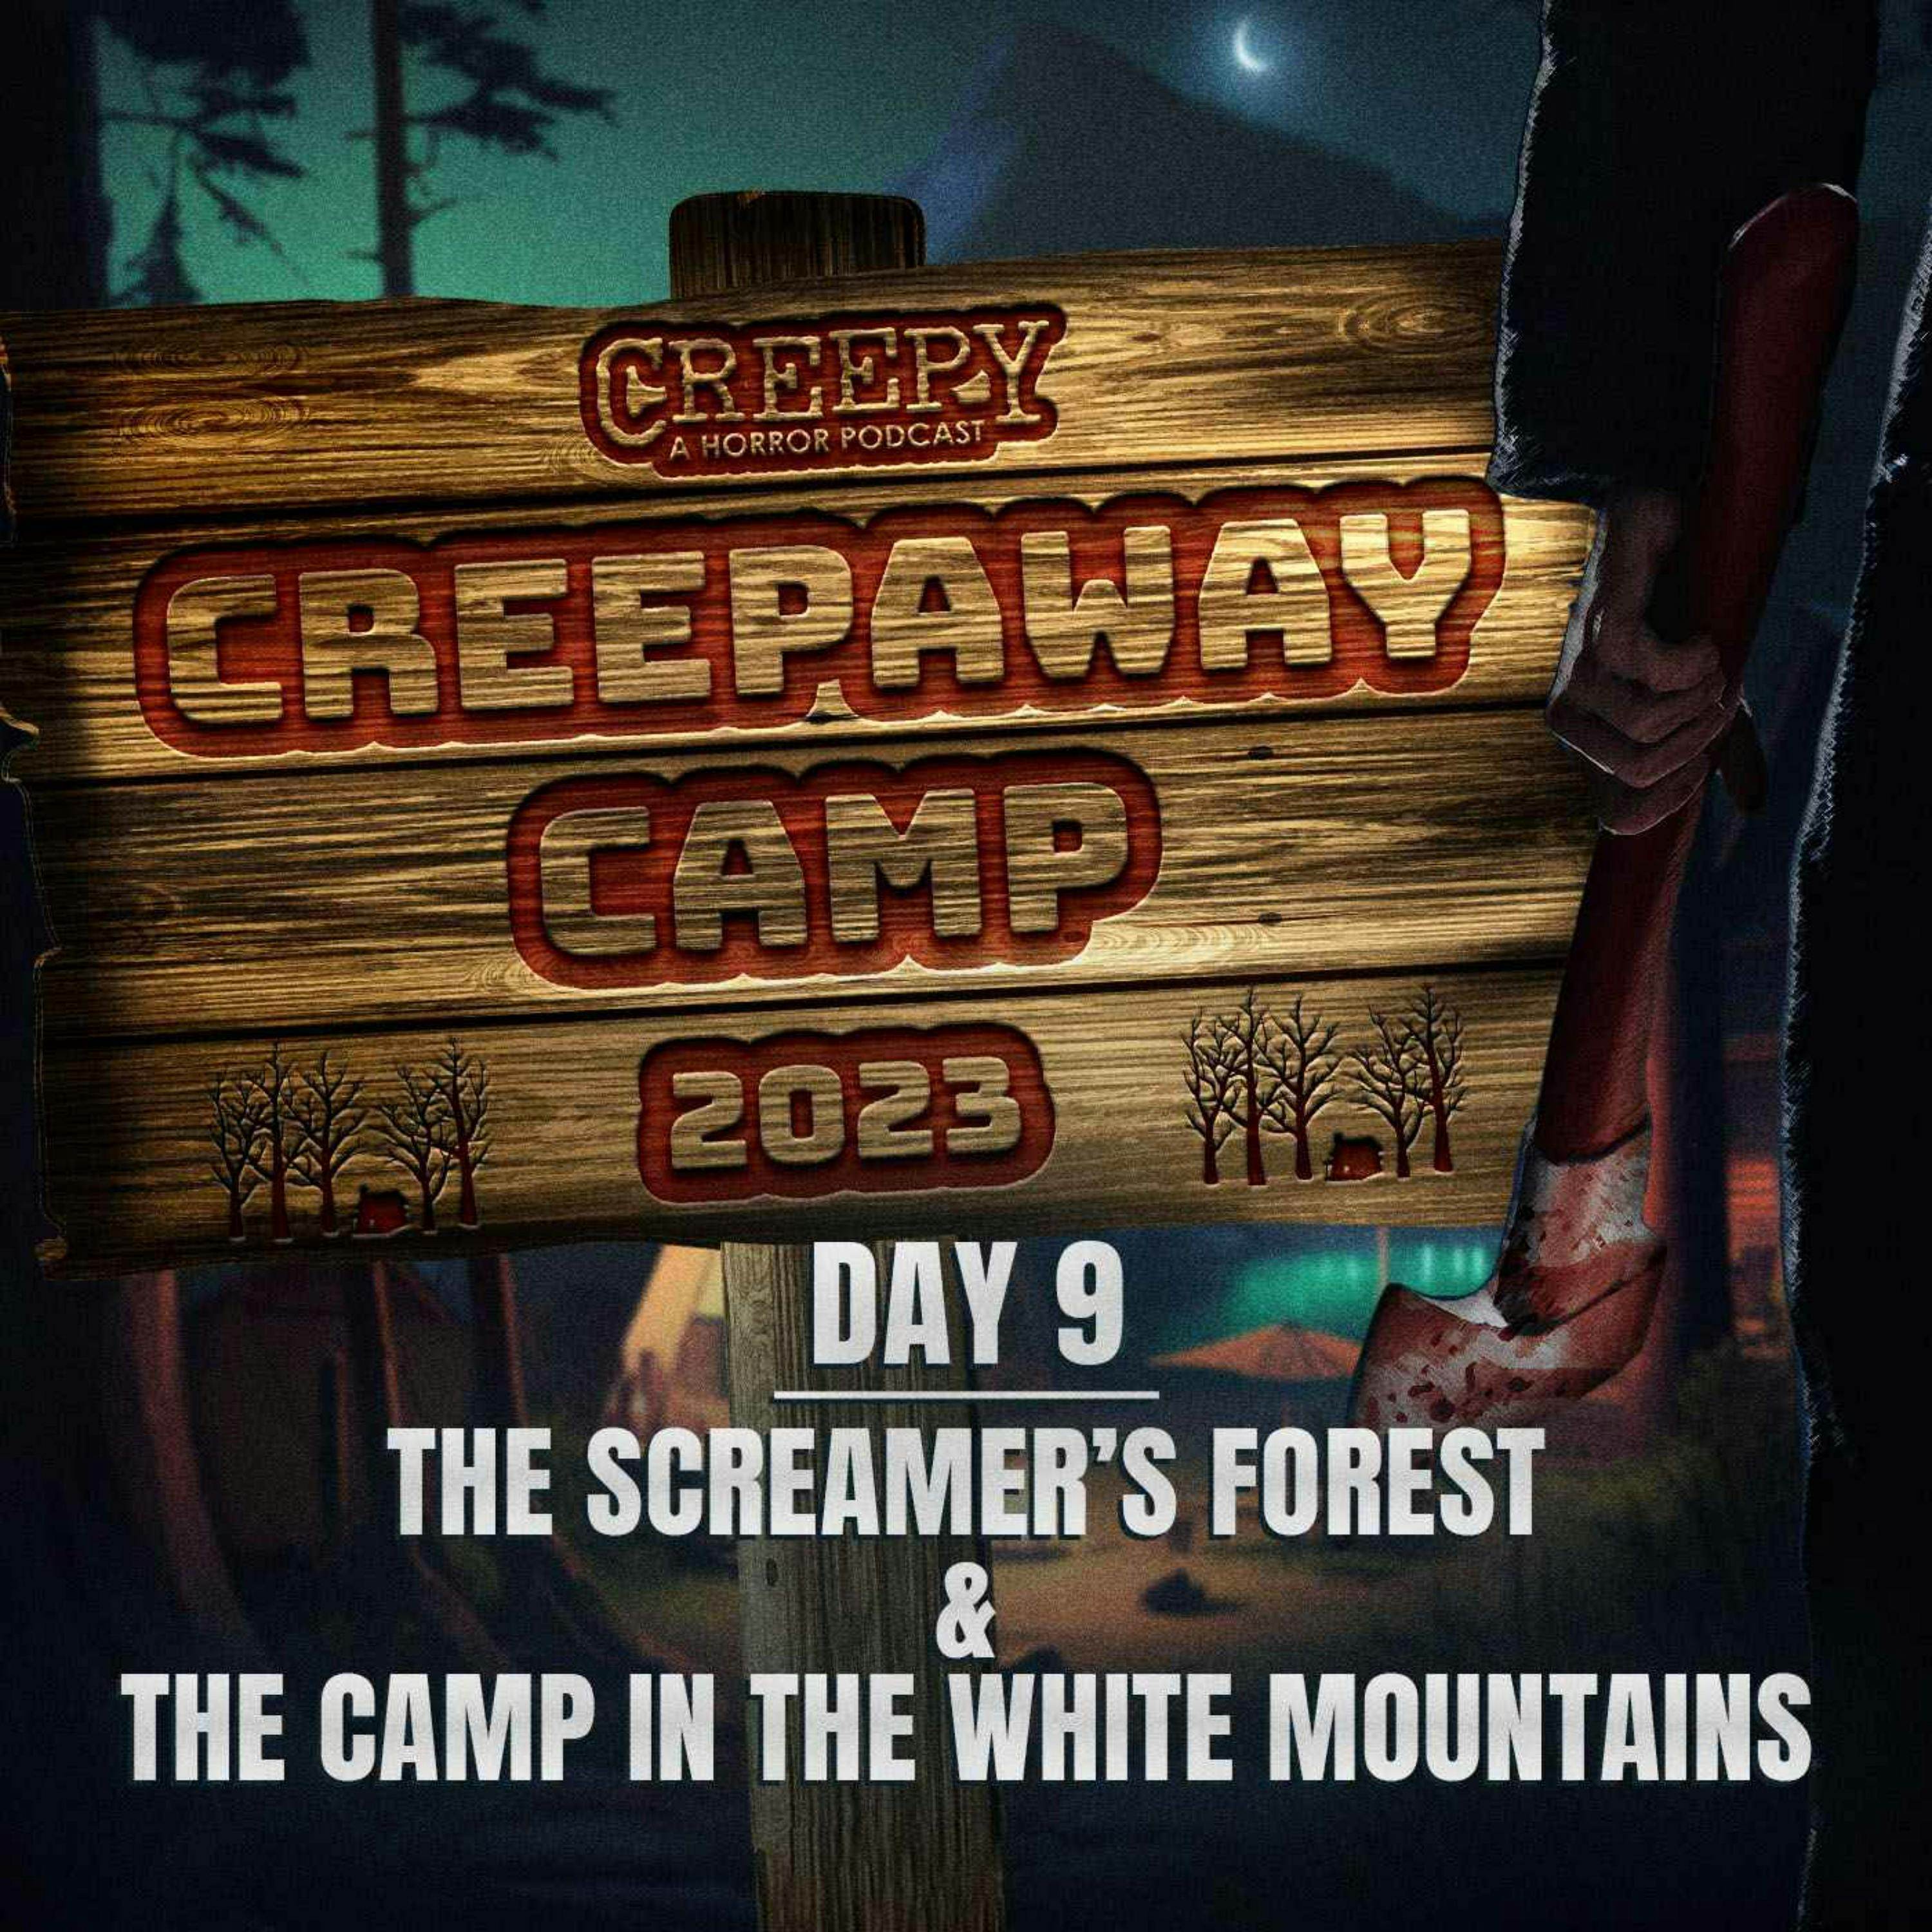 Creepaway Camp 2023 - Day 9: The Screamer’s Forest & The Camp in the White Mountains